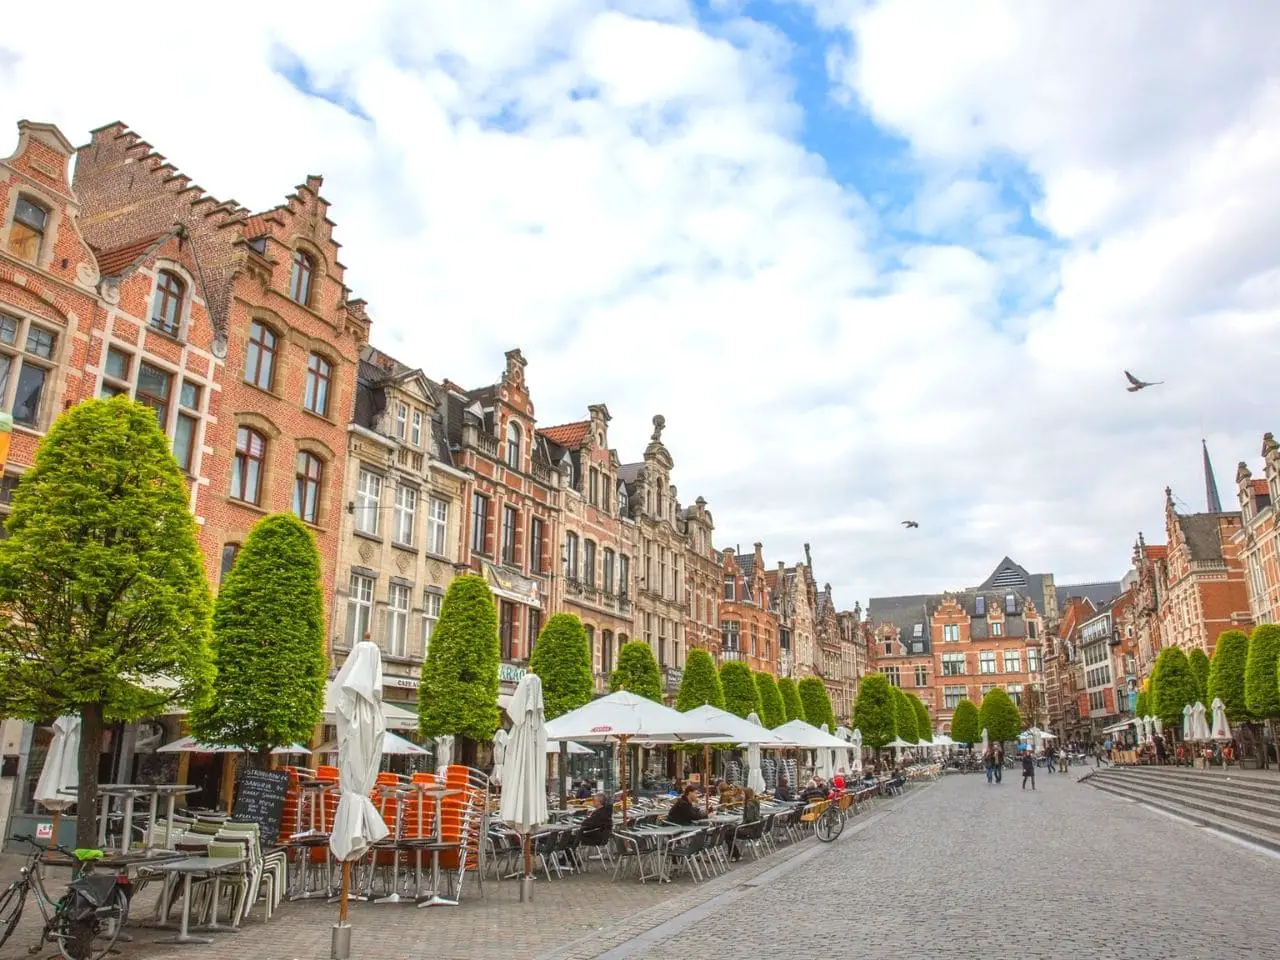 Leuven, one of the most beautiful cities in Belgium